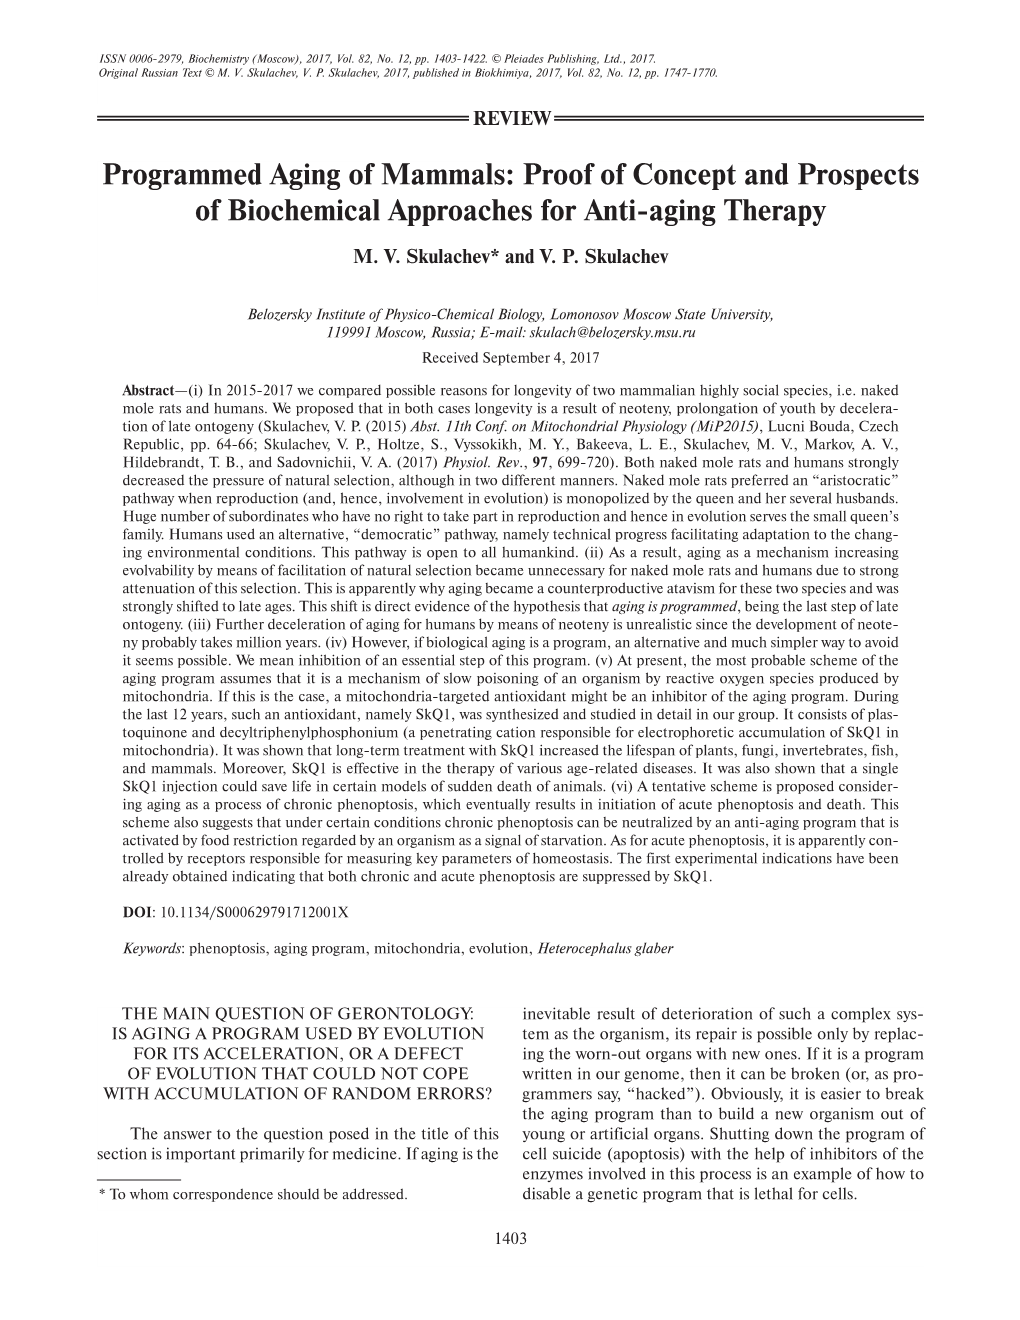 Programmed Aging of Mammals: Proof of Concept and Prospects of Biochemical Approaches for Anti-Aging Therapy